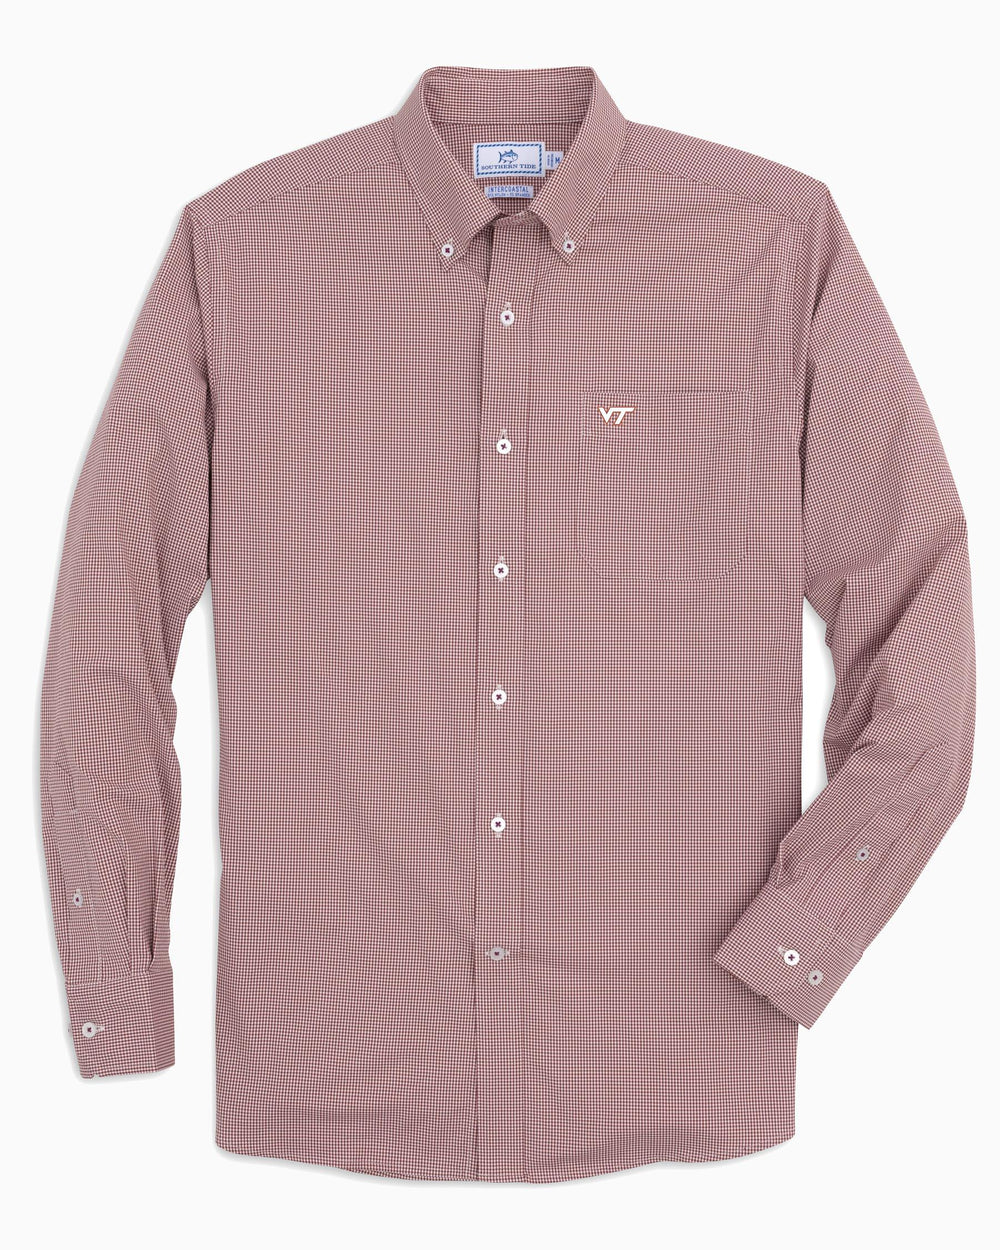 The front view of the Men's Red Virginia Tech Hokies Gingham Button Down Shirt by Southern Tide - Chianti